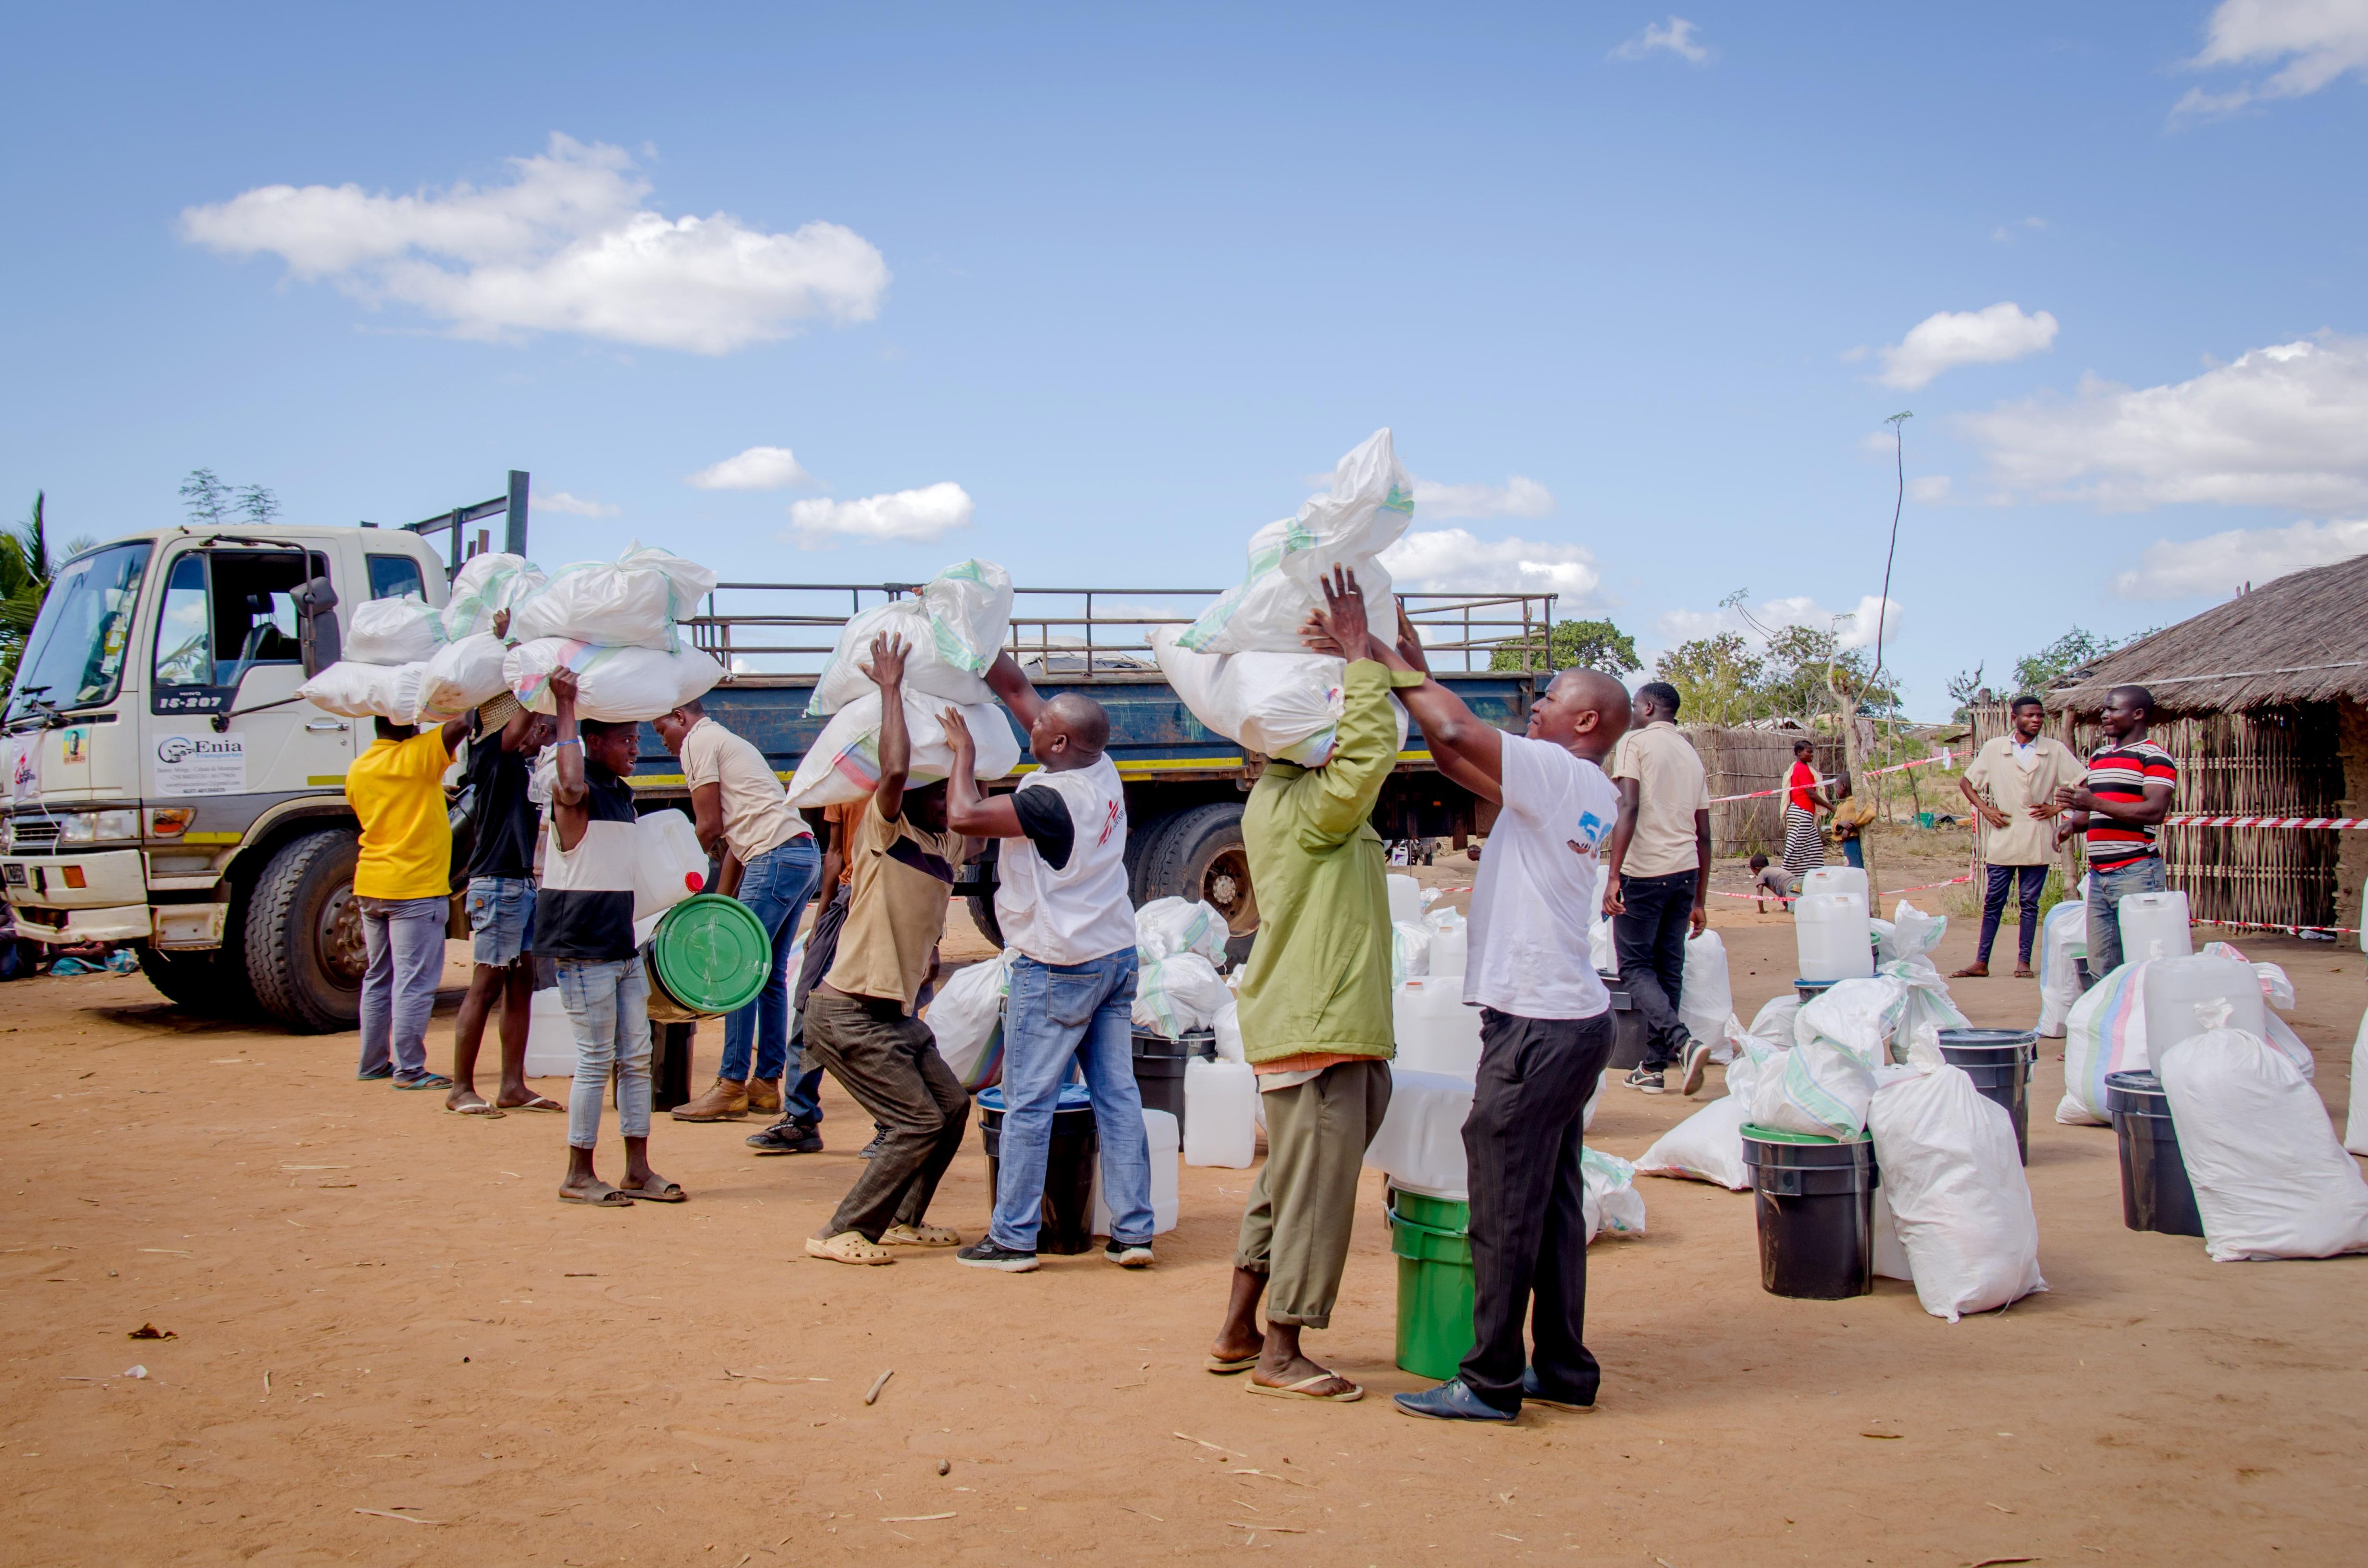 40 Years of Medical Services in Mozambique: An MSF team distributes kits of essential items such as tents, jerrycans and mosquito nets in Ntele, in Montepuez